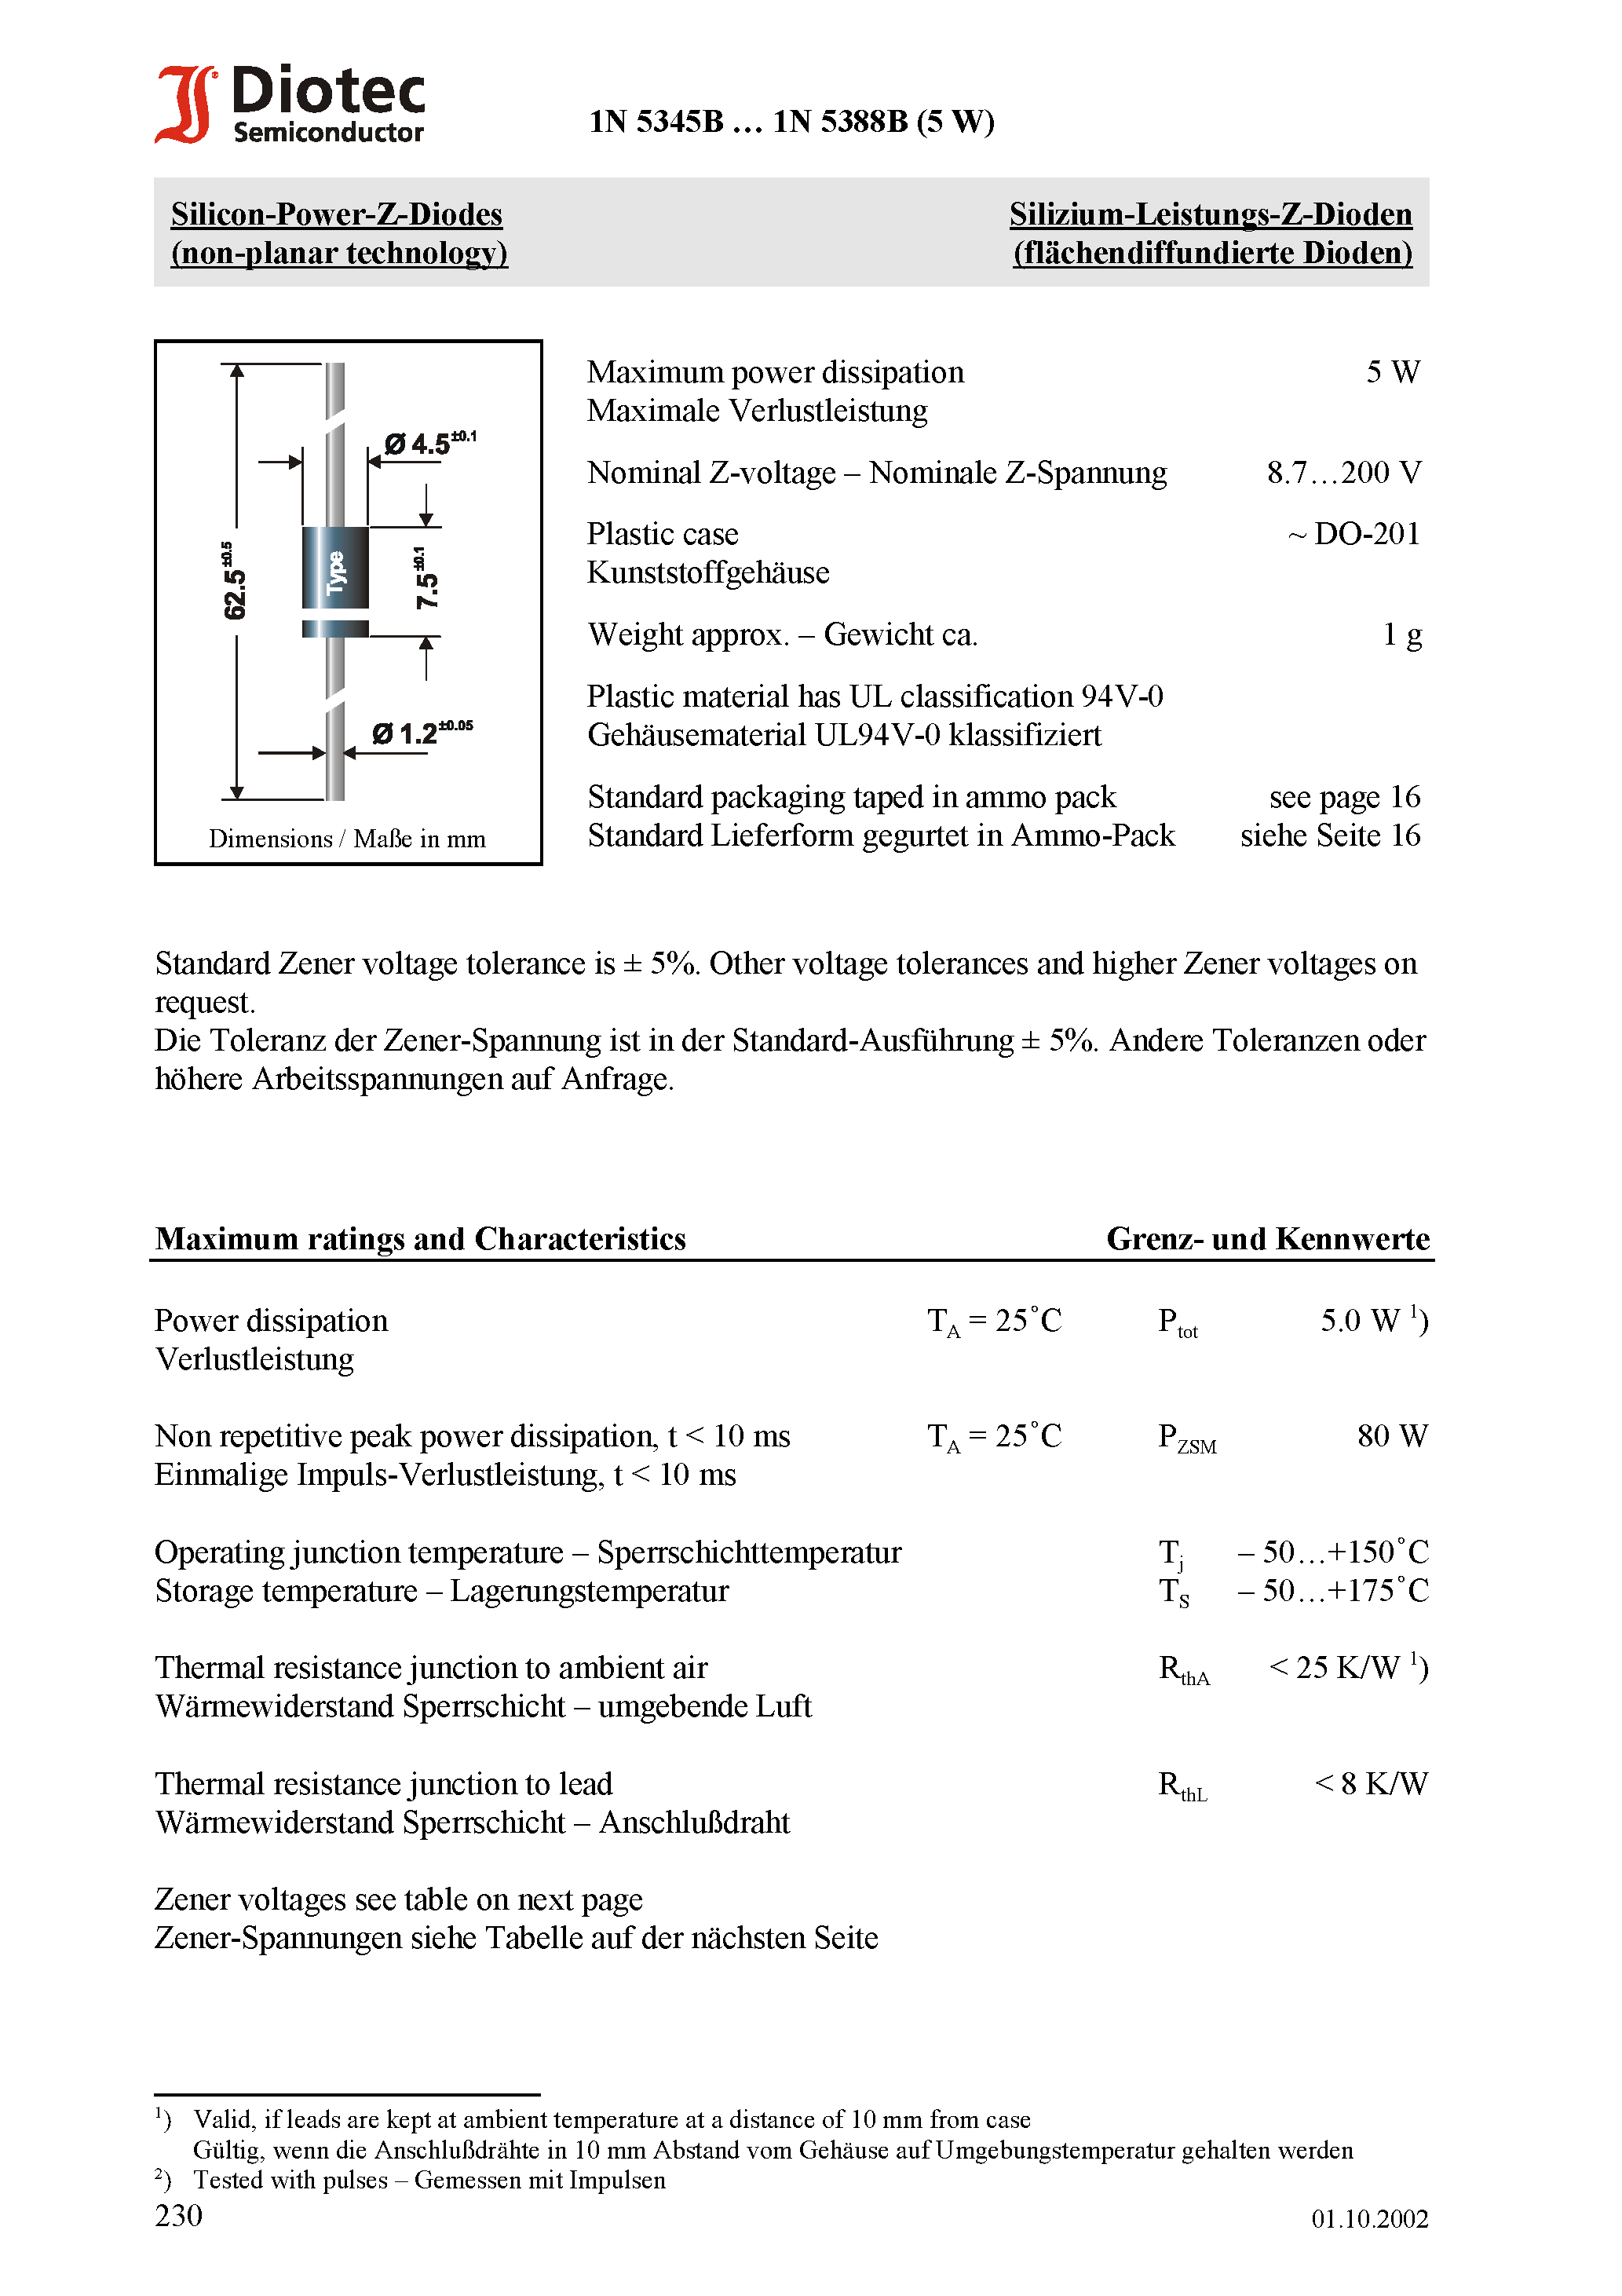 Datasheet 1N5366B - Silicon-Power-Z-Diodes (non-planar technology) page 1